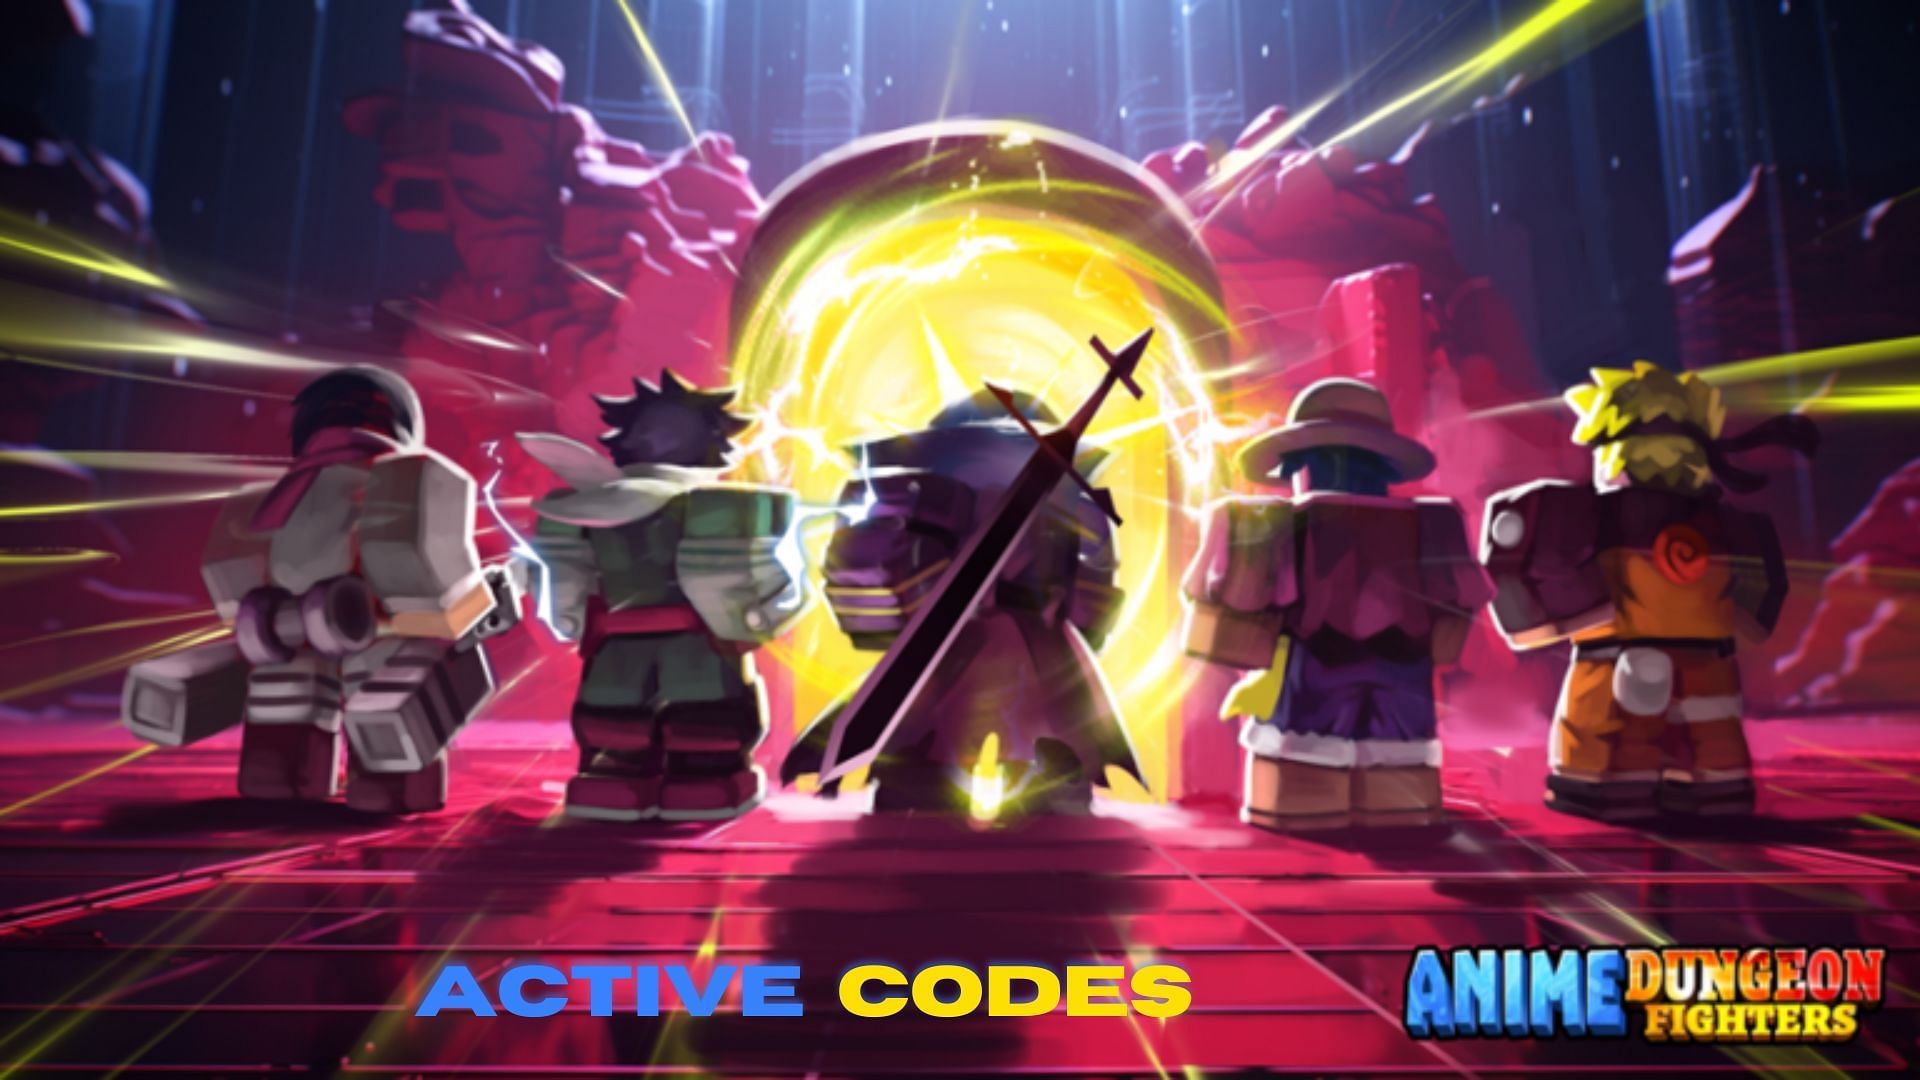 Use the active codes to become the best in Anime Dungeon Fighters (Roblox||Sportskeeda)